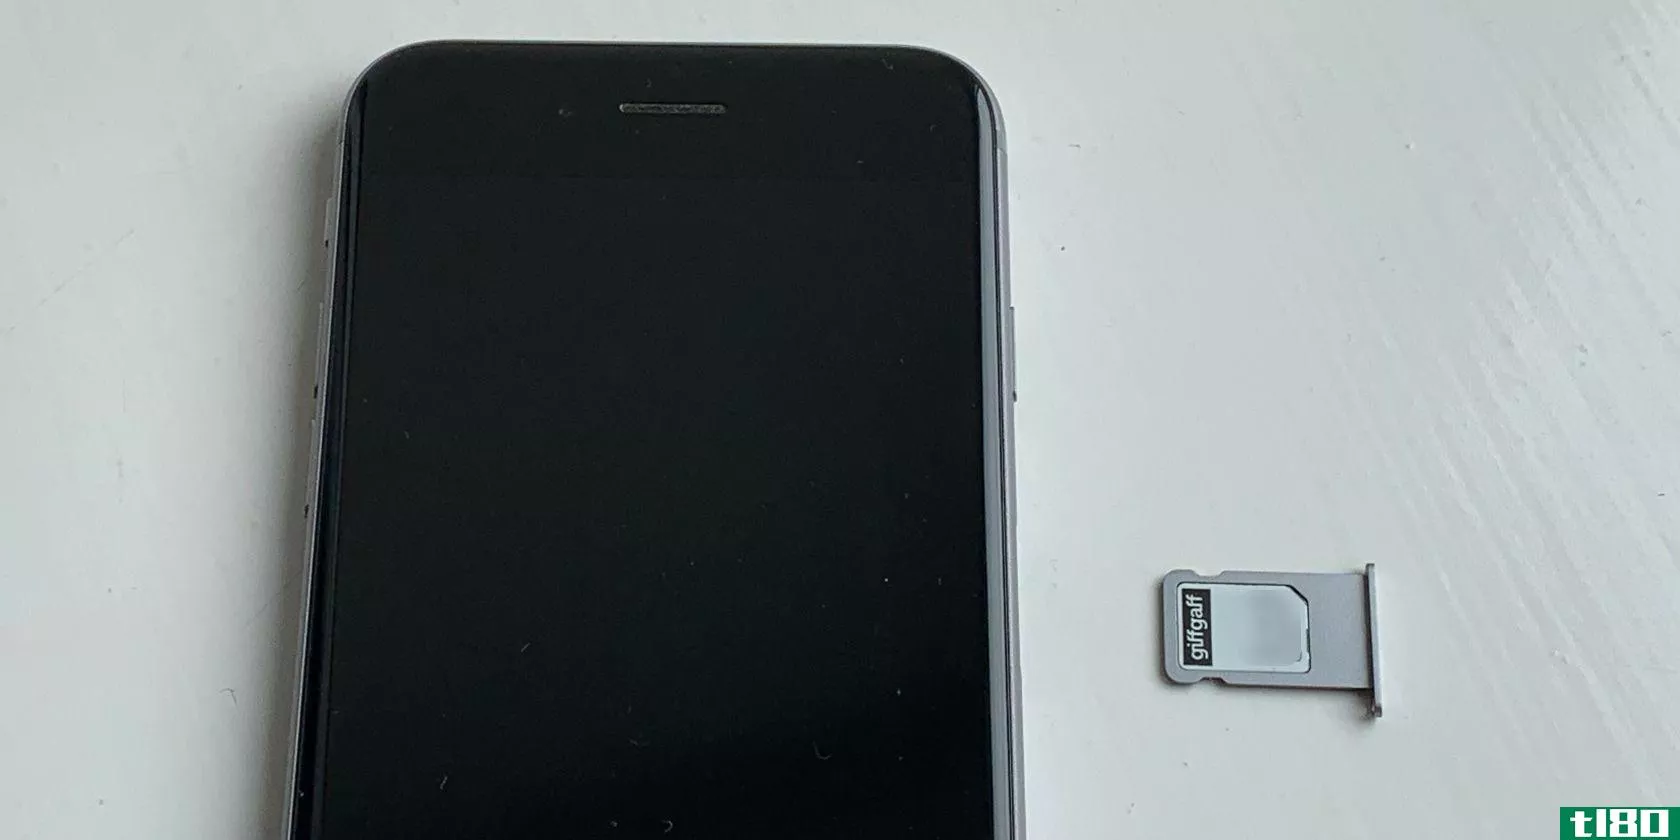 SIM card in tray next to iPhone